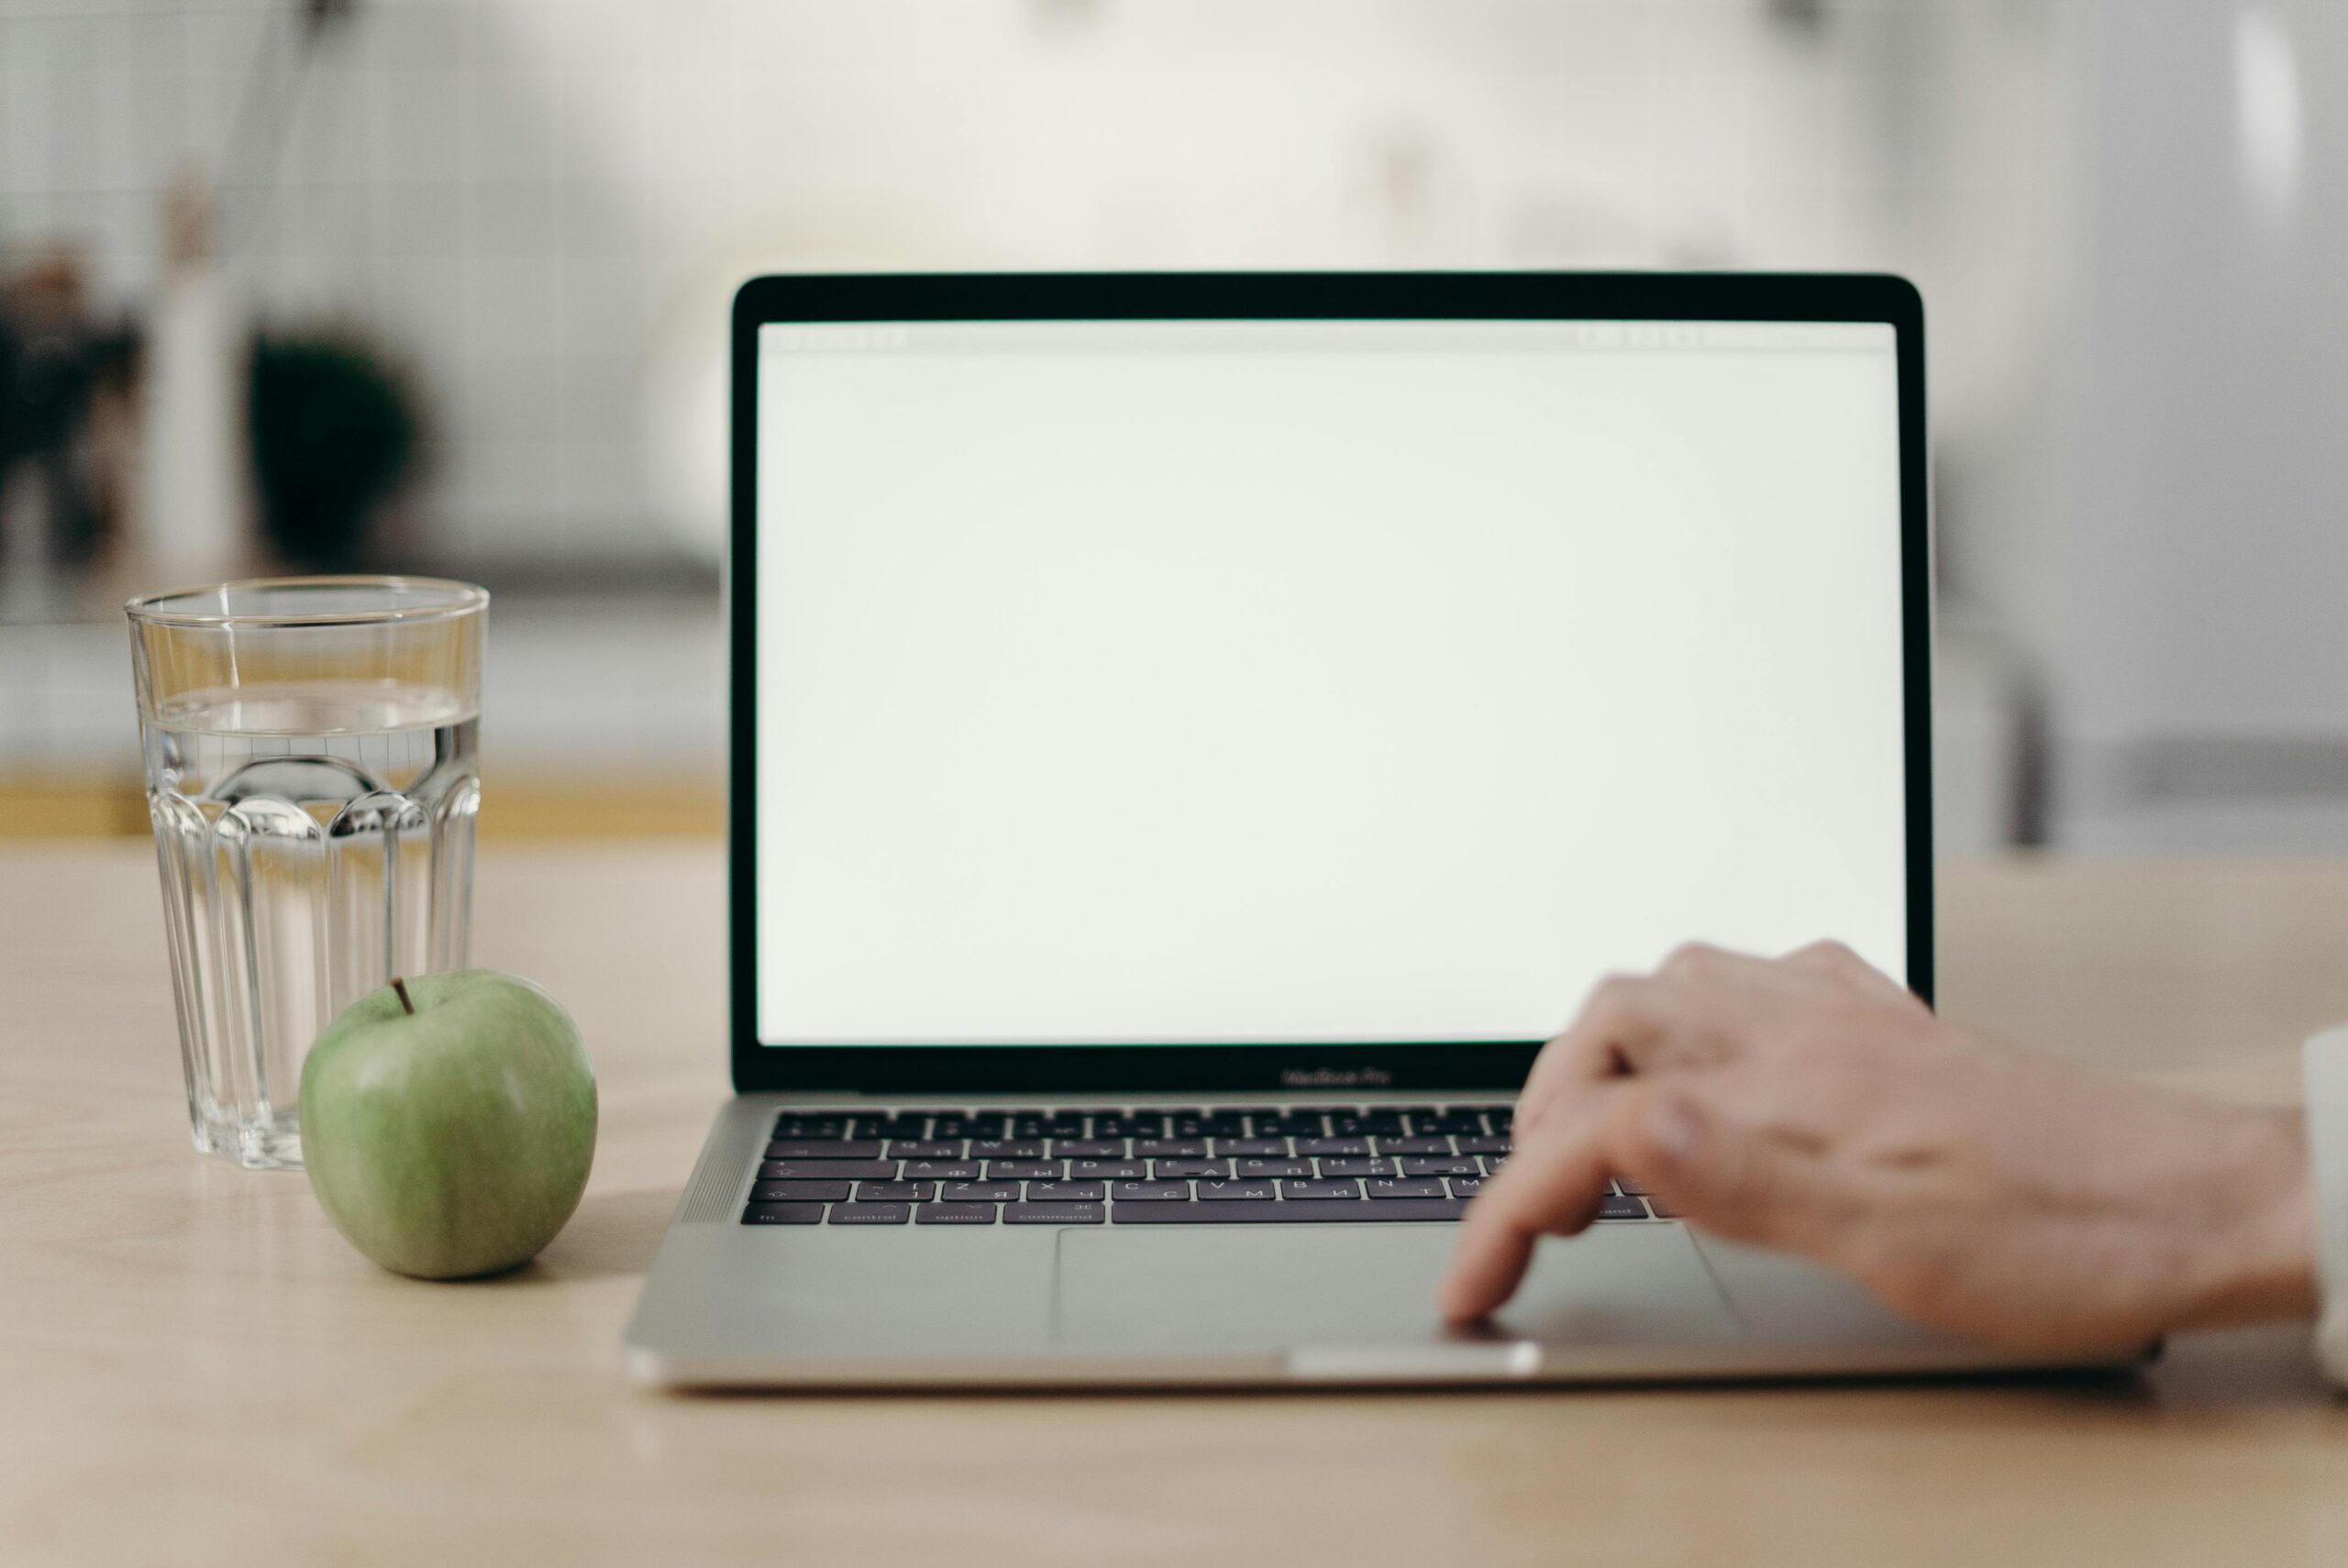 Typing on a blank Macbook screen on a table